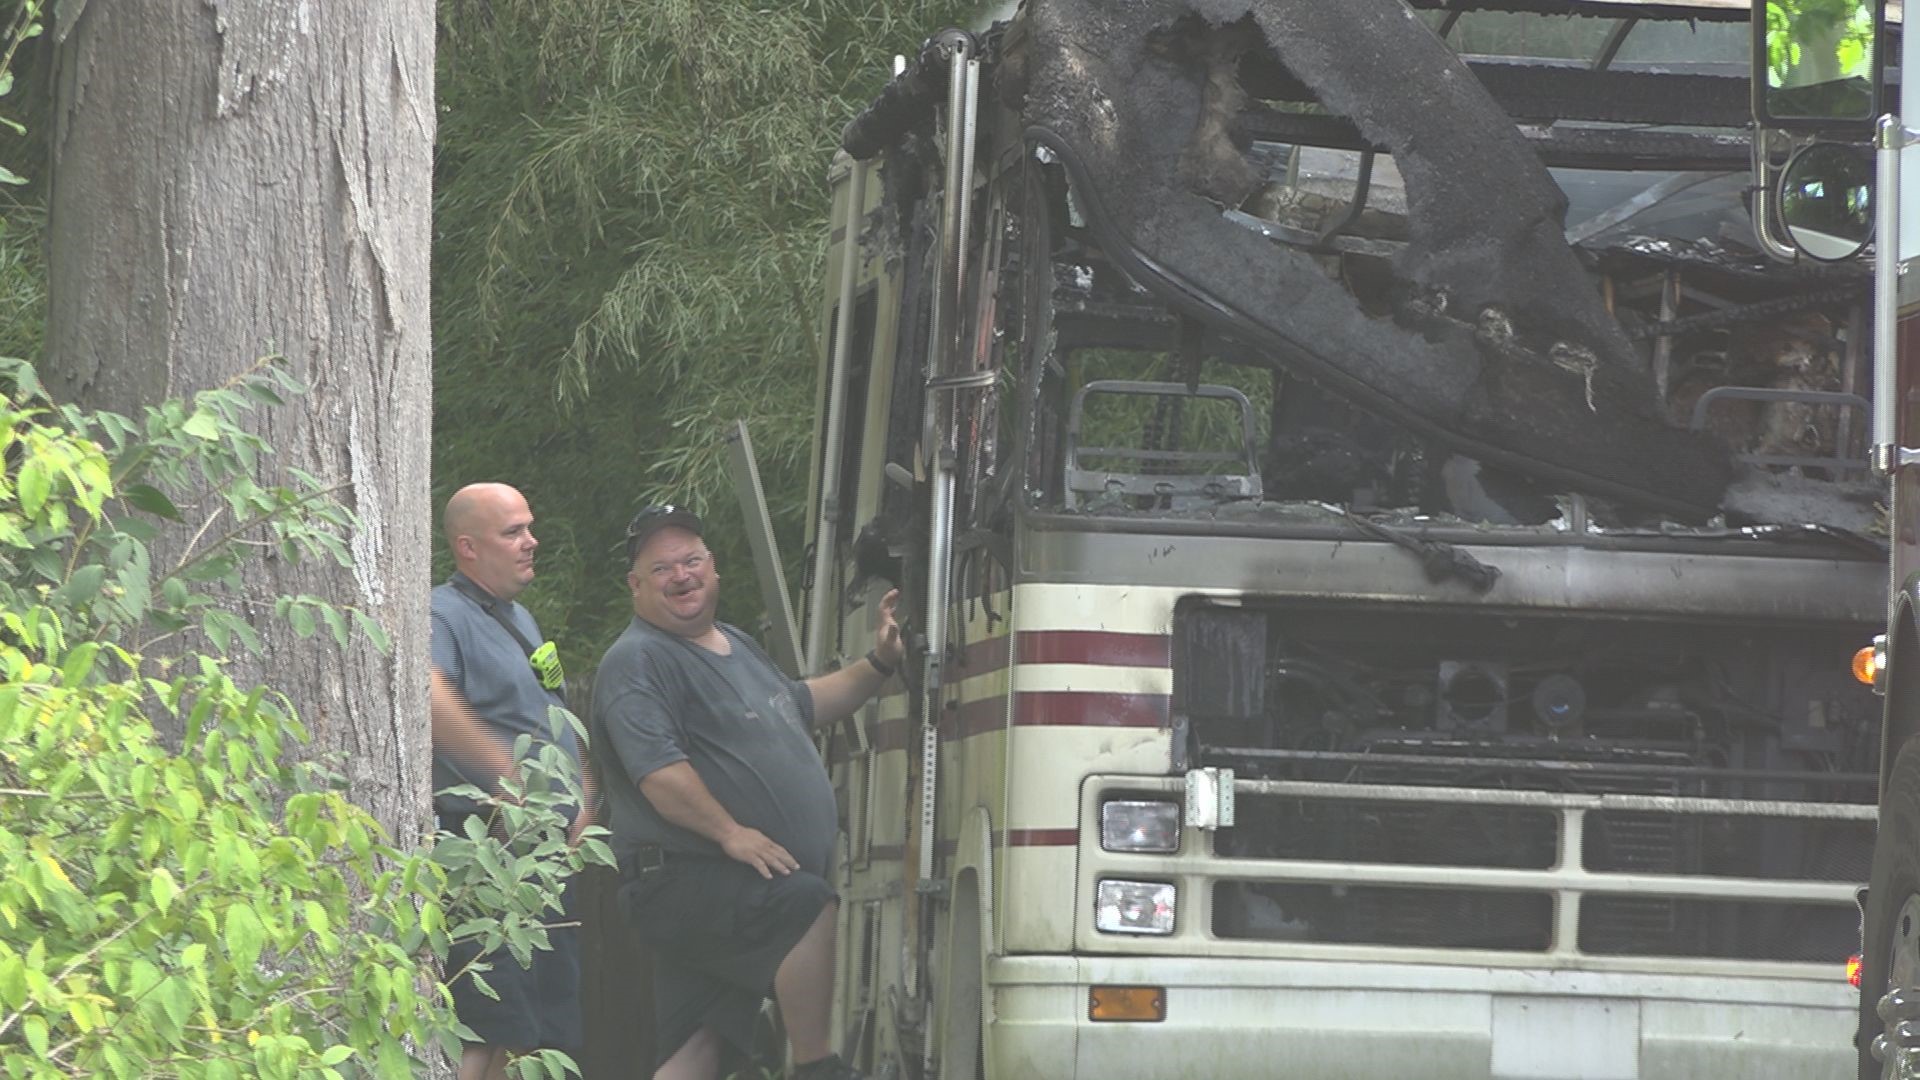 An RV caught fire in a driveway of a Greensboro home Monday morning.